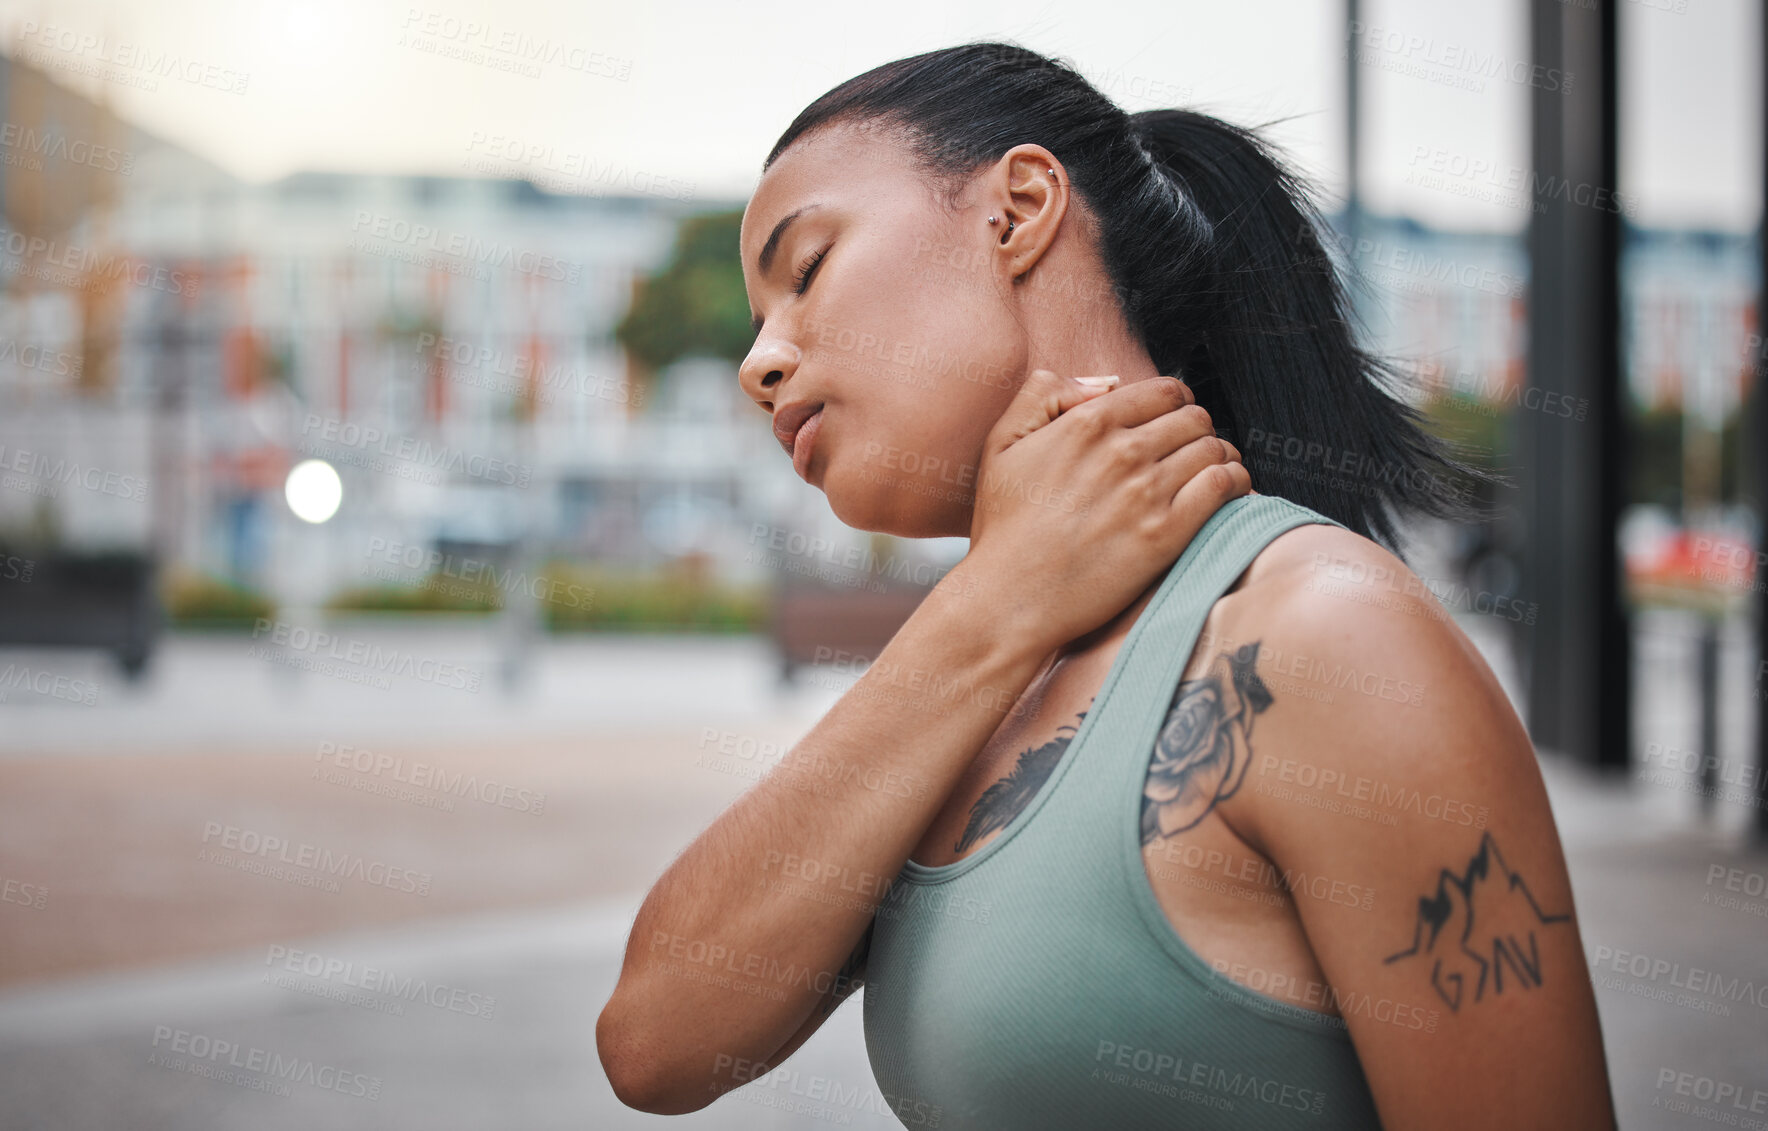 Buy stock photo One young african american woman struggling with a neck injury during a workout in the city. A beautiful mixed race woman exercising outside and holding her neck in pain while struggling with cramp